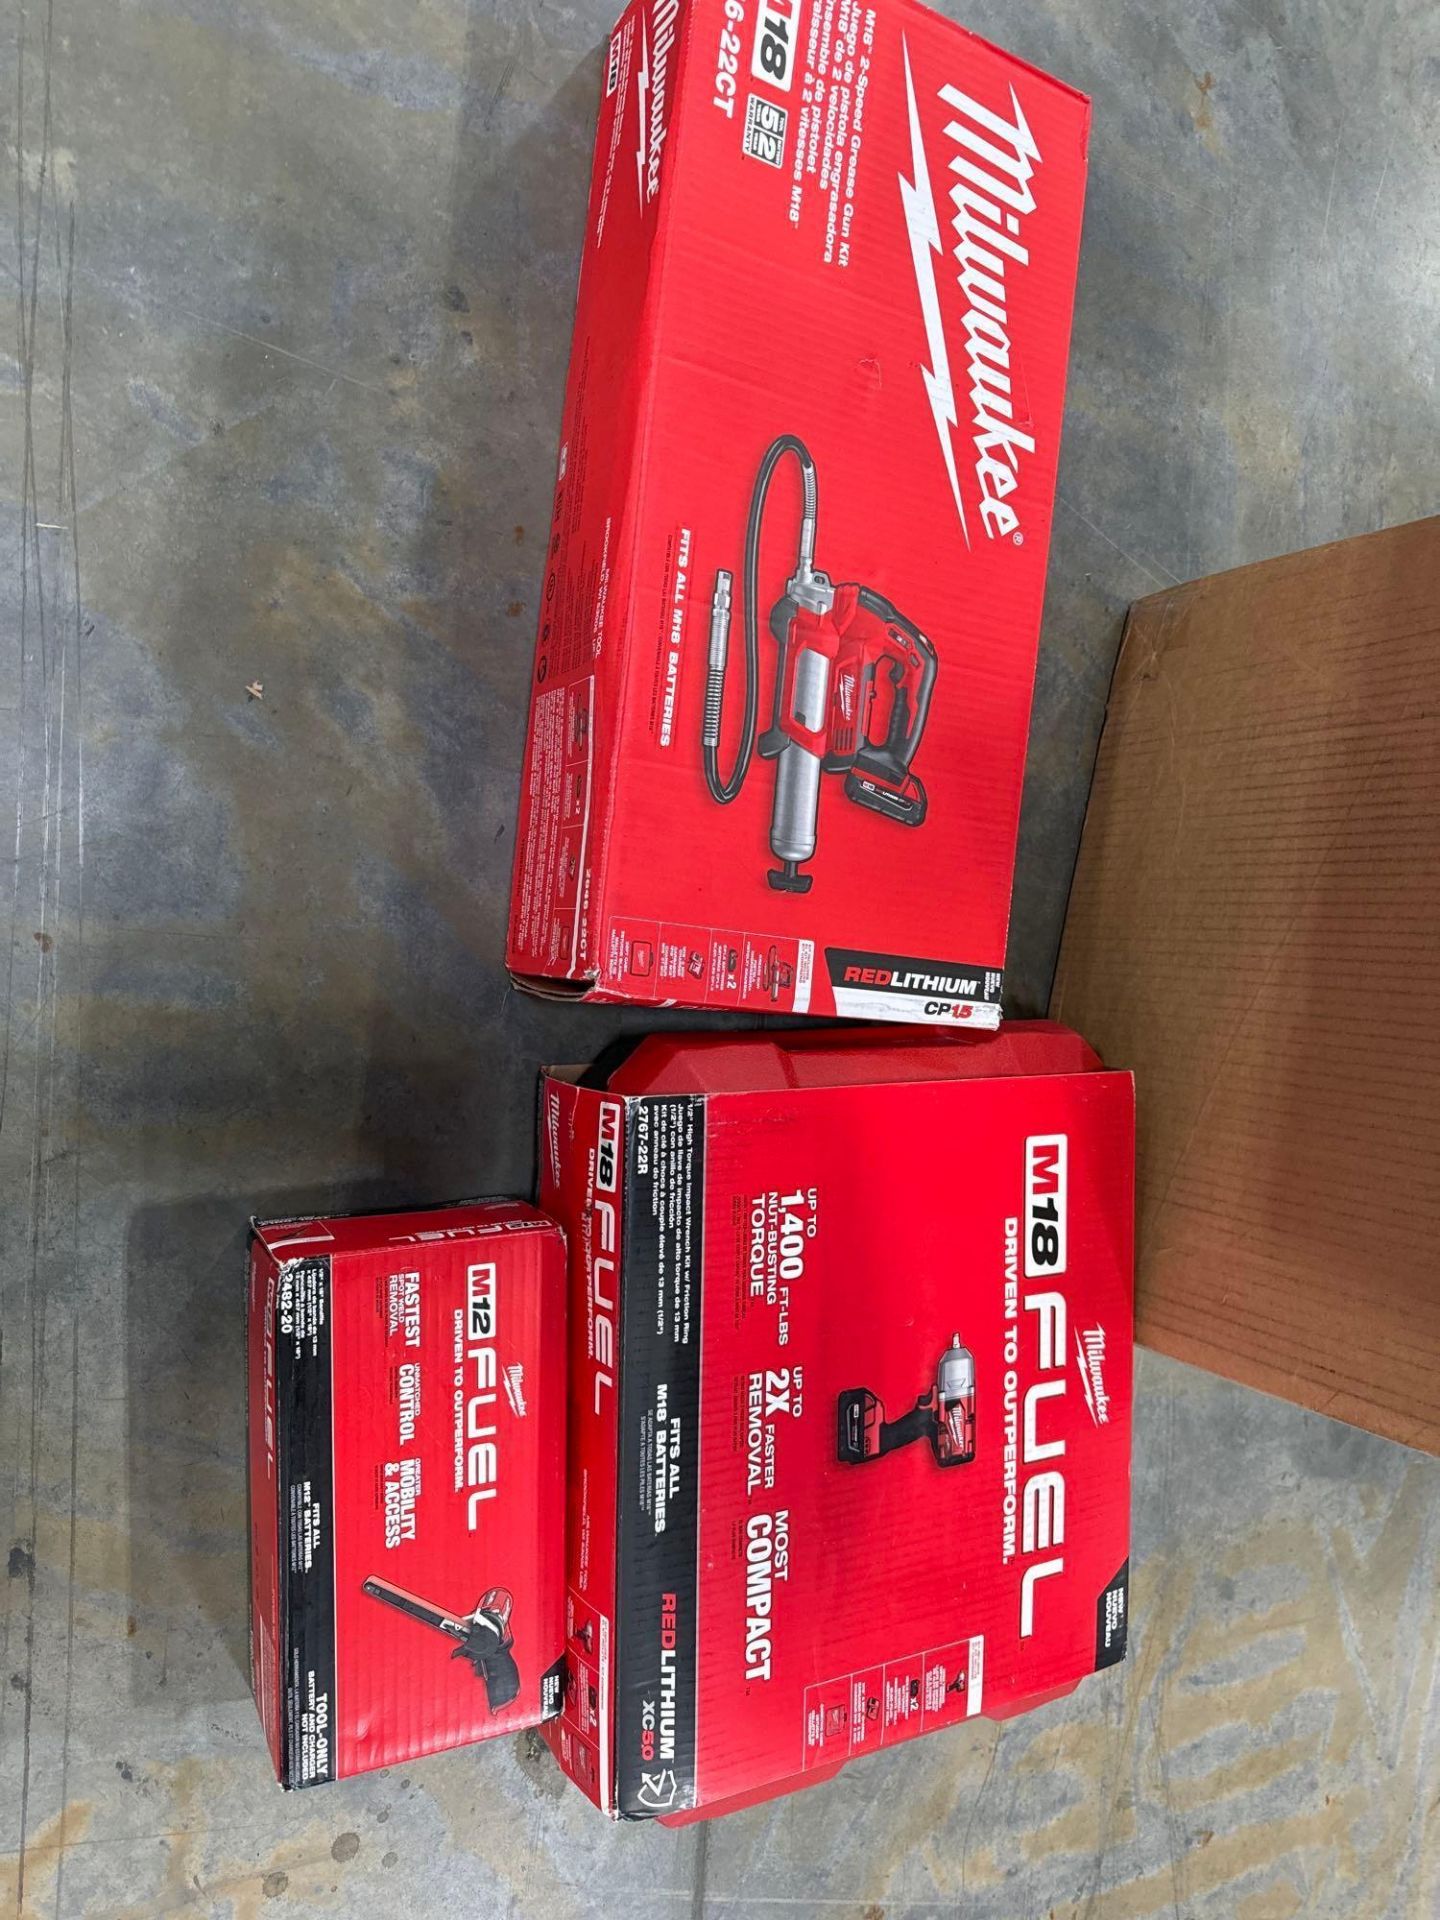 *Milwaukee Grease Gun, Sander and torque impact wrench